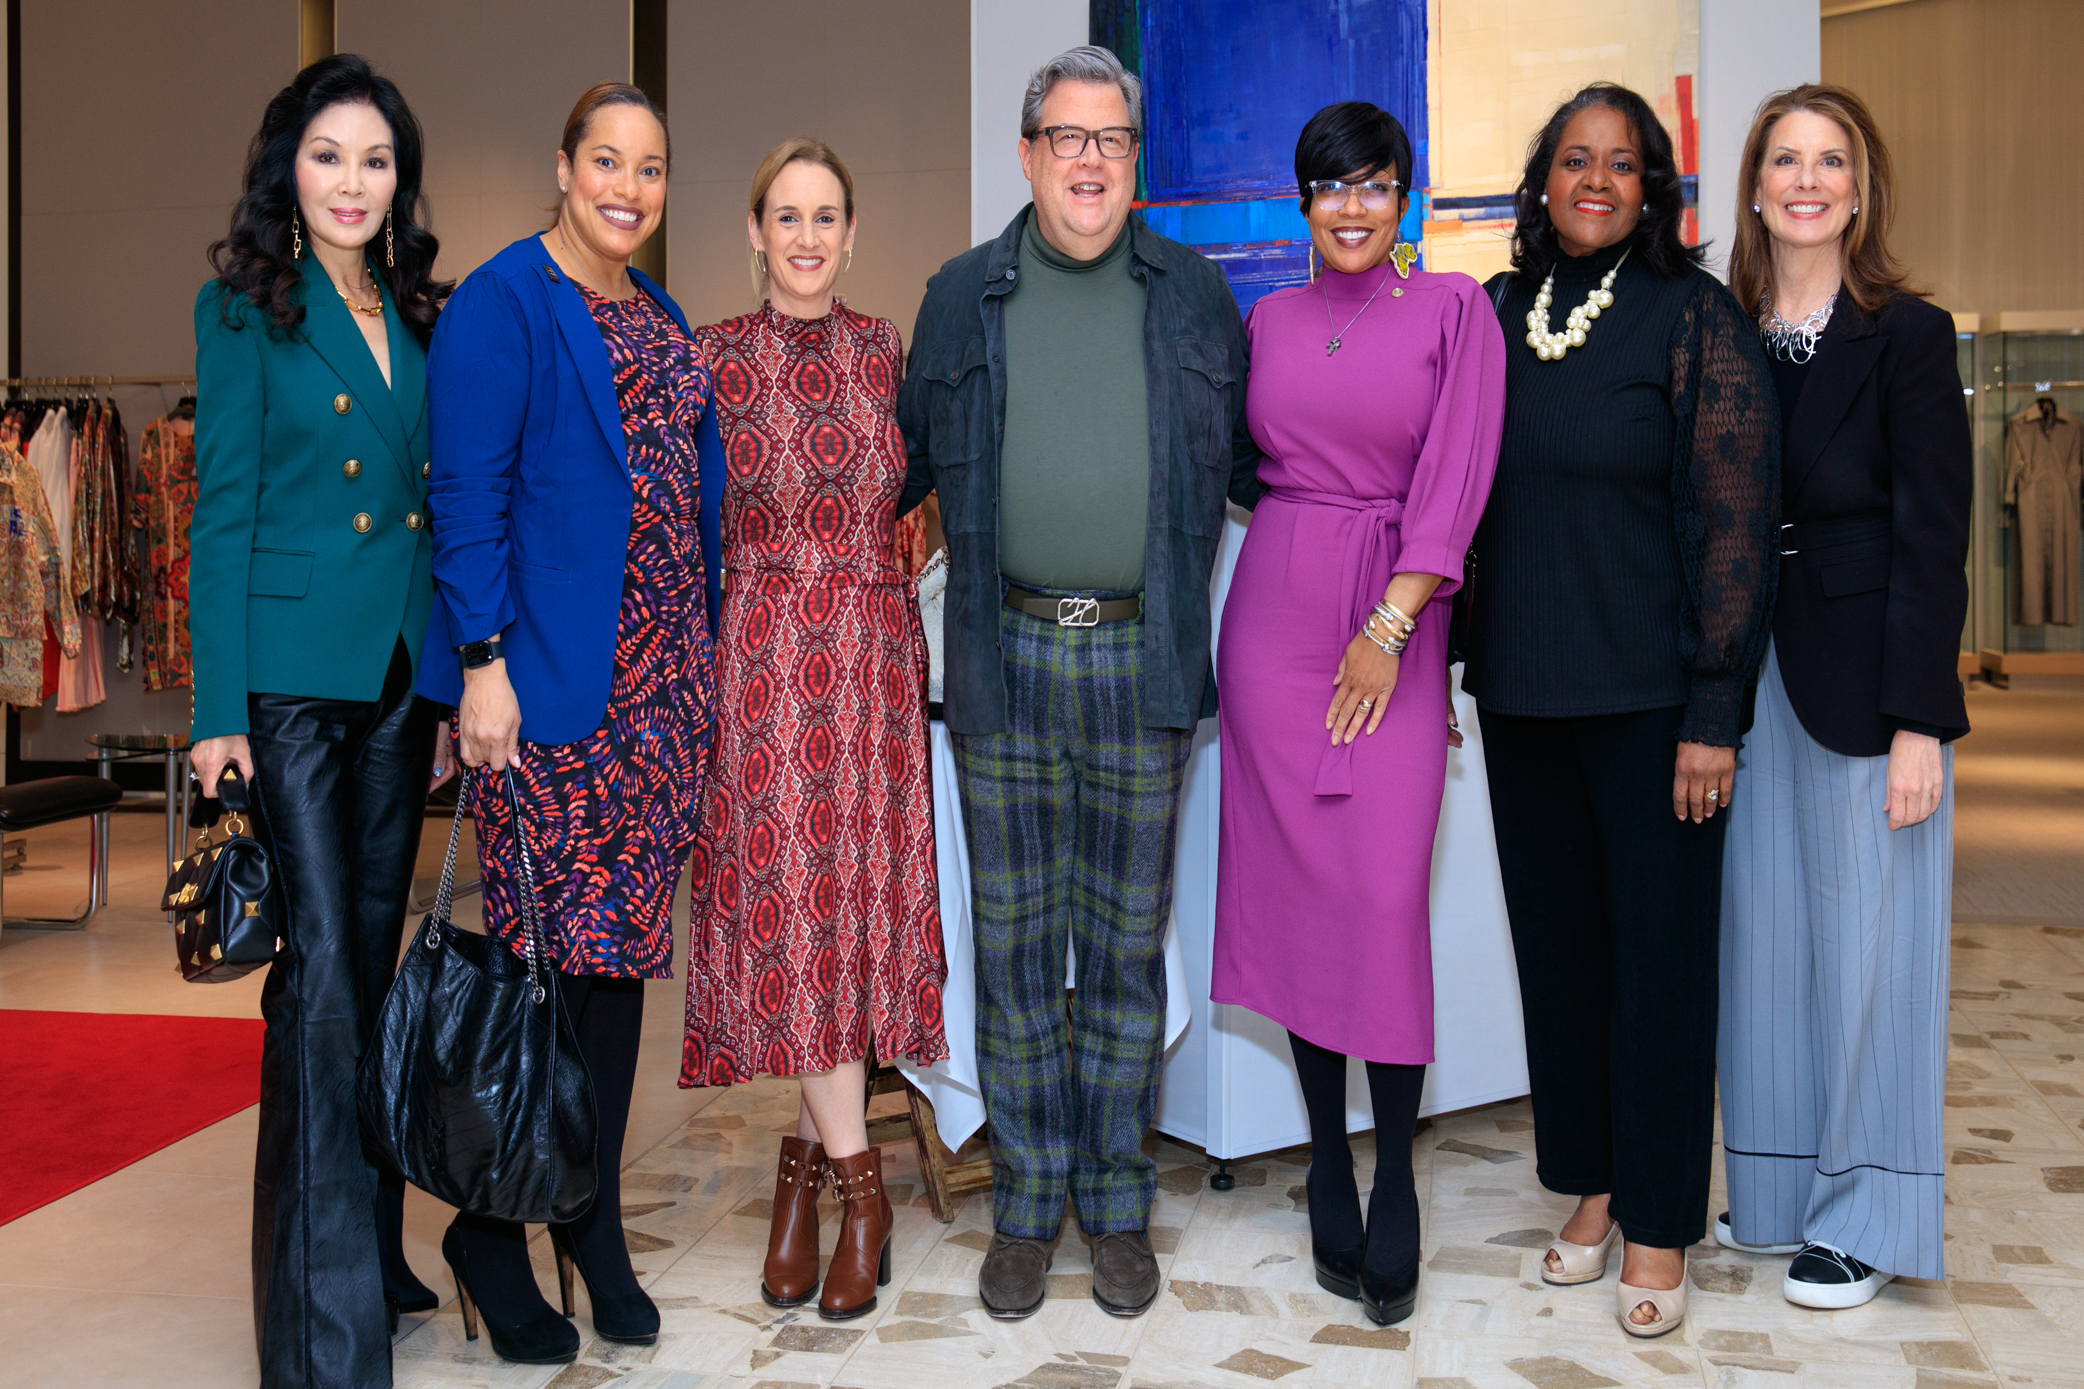 Neiman Marcus Partners with over 100 Influential Women in Nationwide Panel  Series - WomenInc.